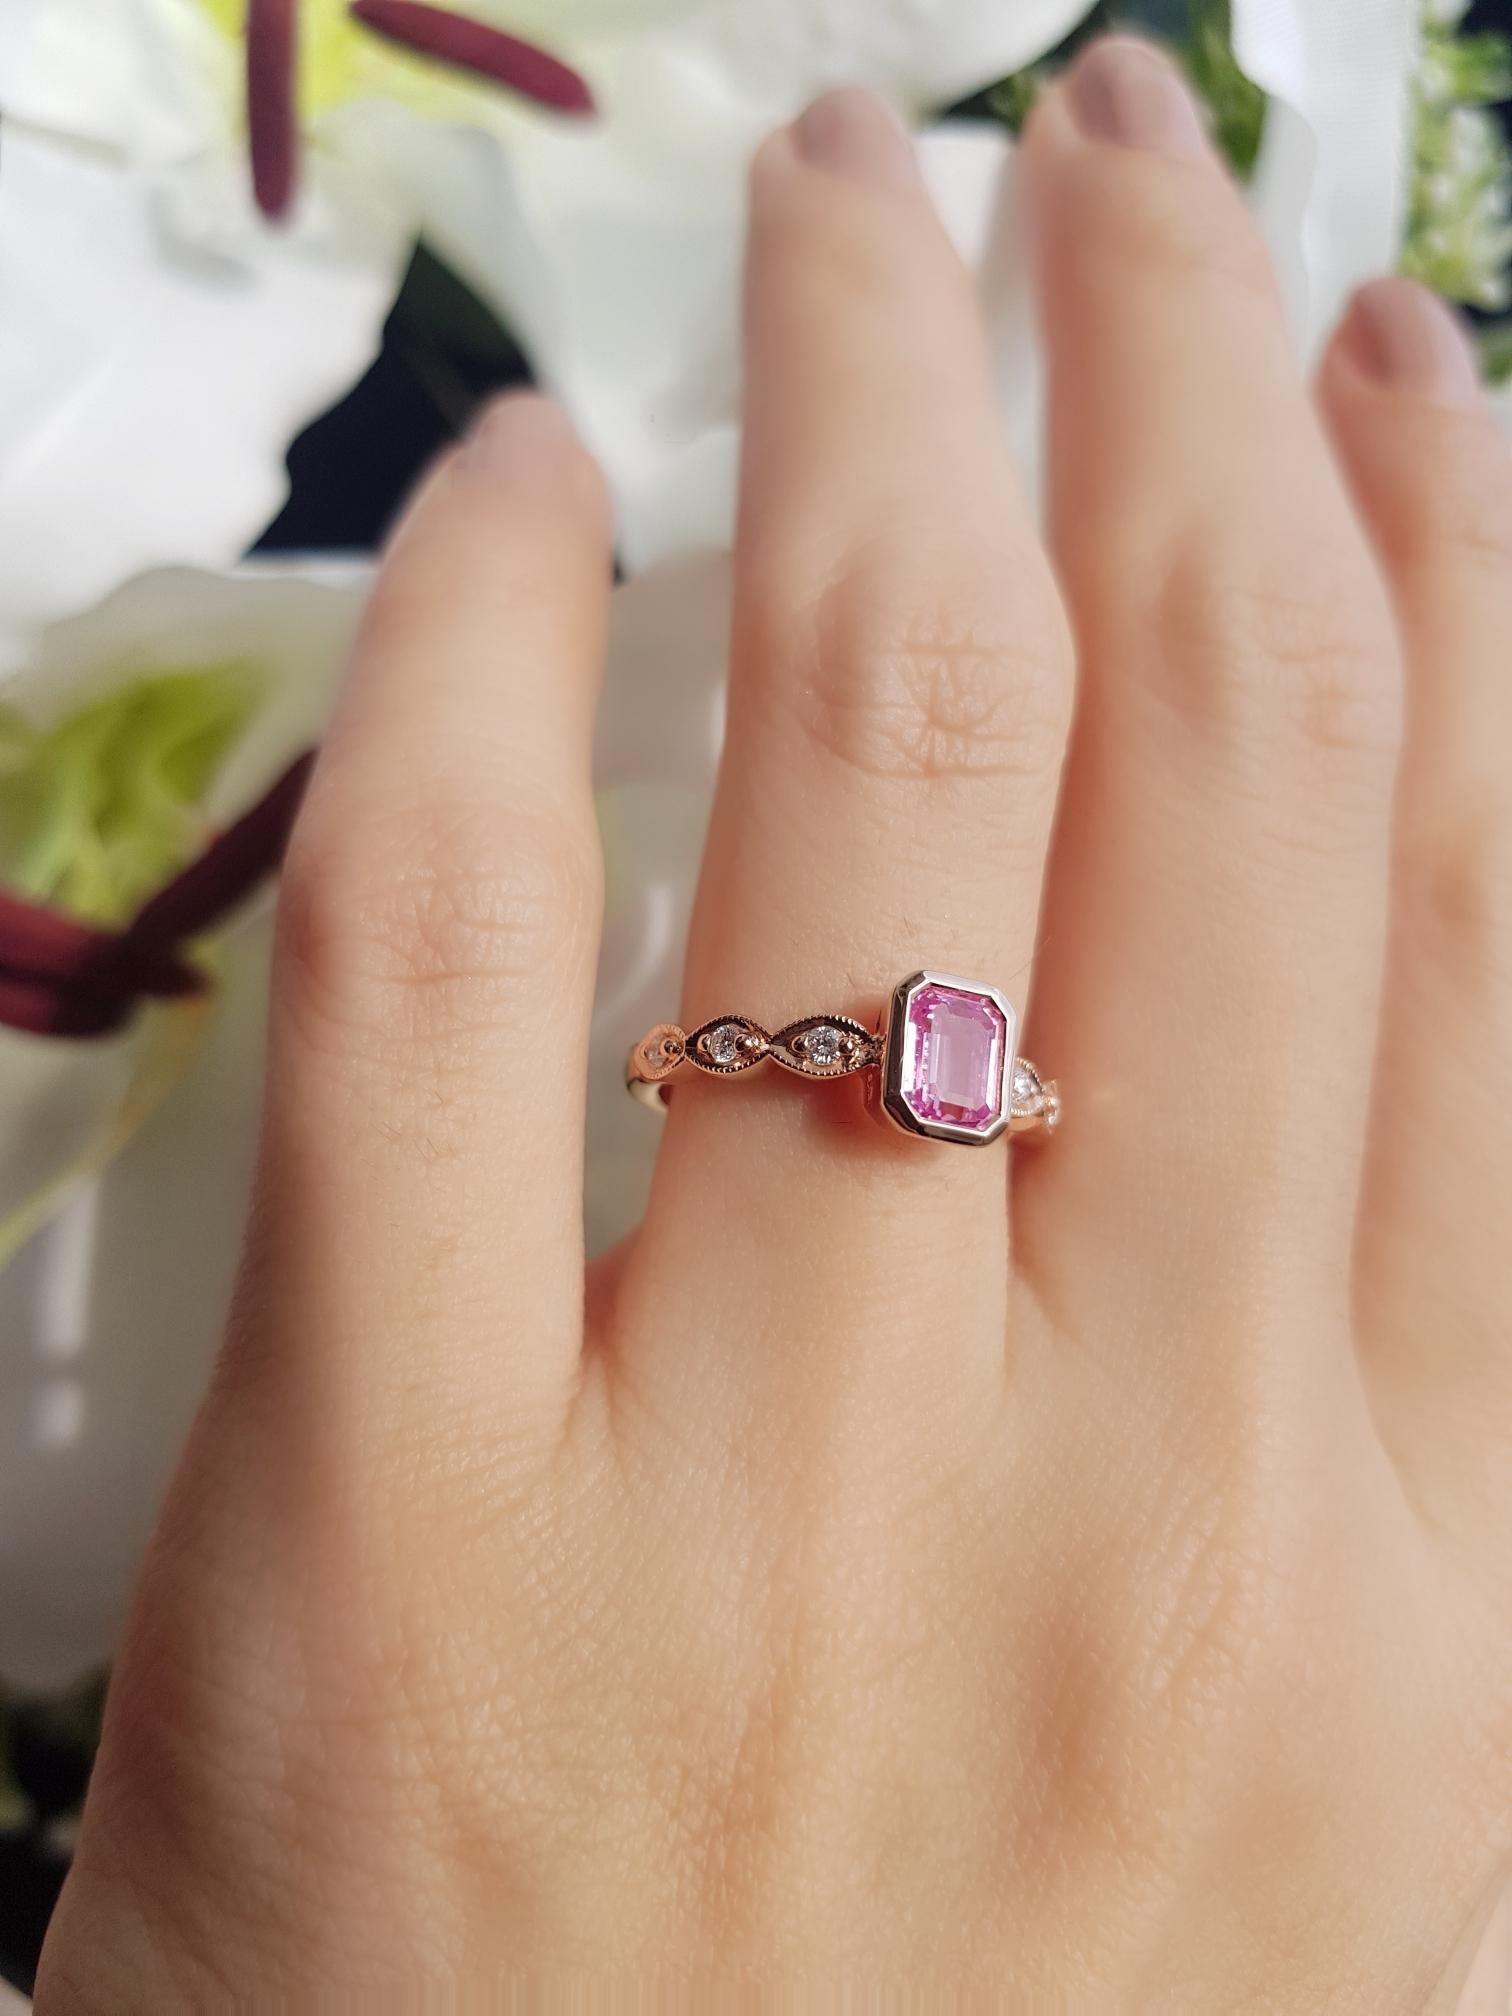 This gorgeous pretty ring is beautifully set with an emerald cut natural pink sapphire and round diamonds on shoulders. The intense pink sapphire is in bezel setting. The diamonds each set into an elongated marquise create a unique detailing to this